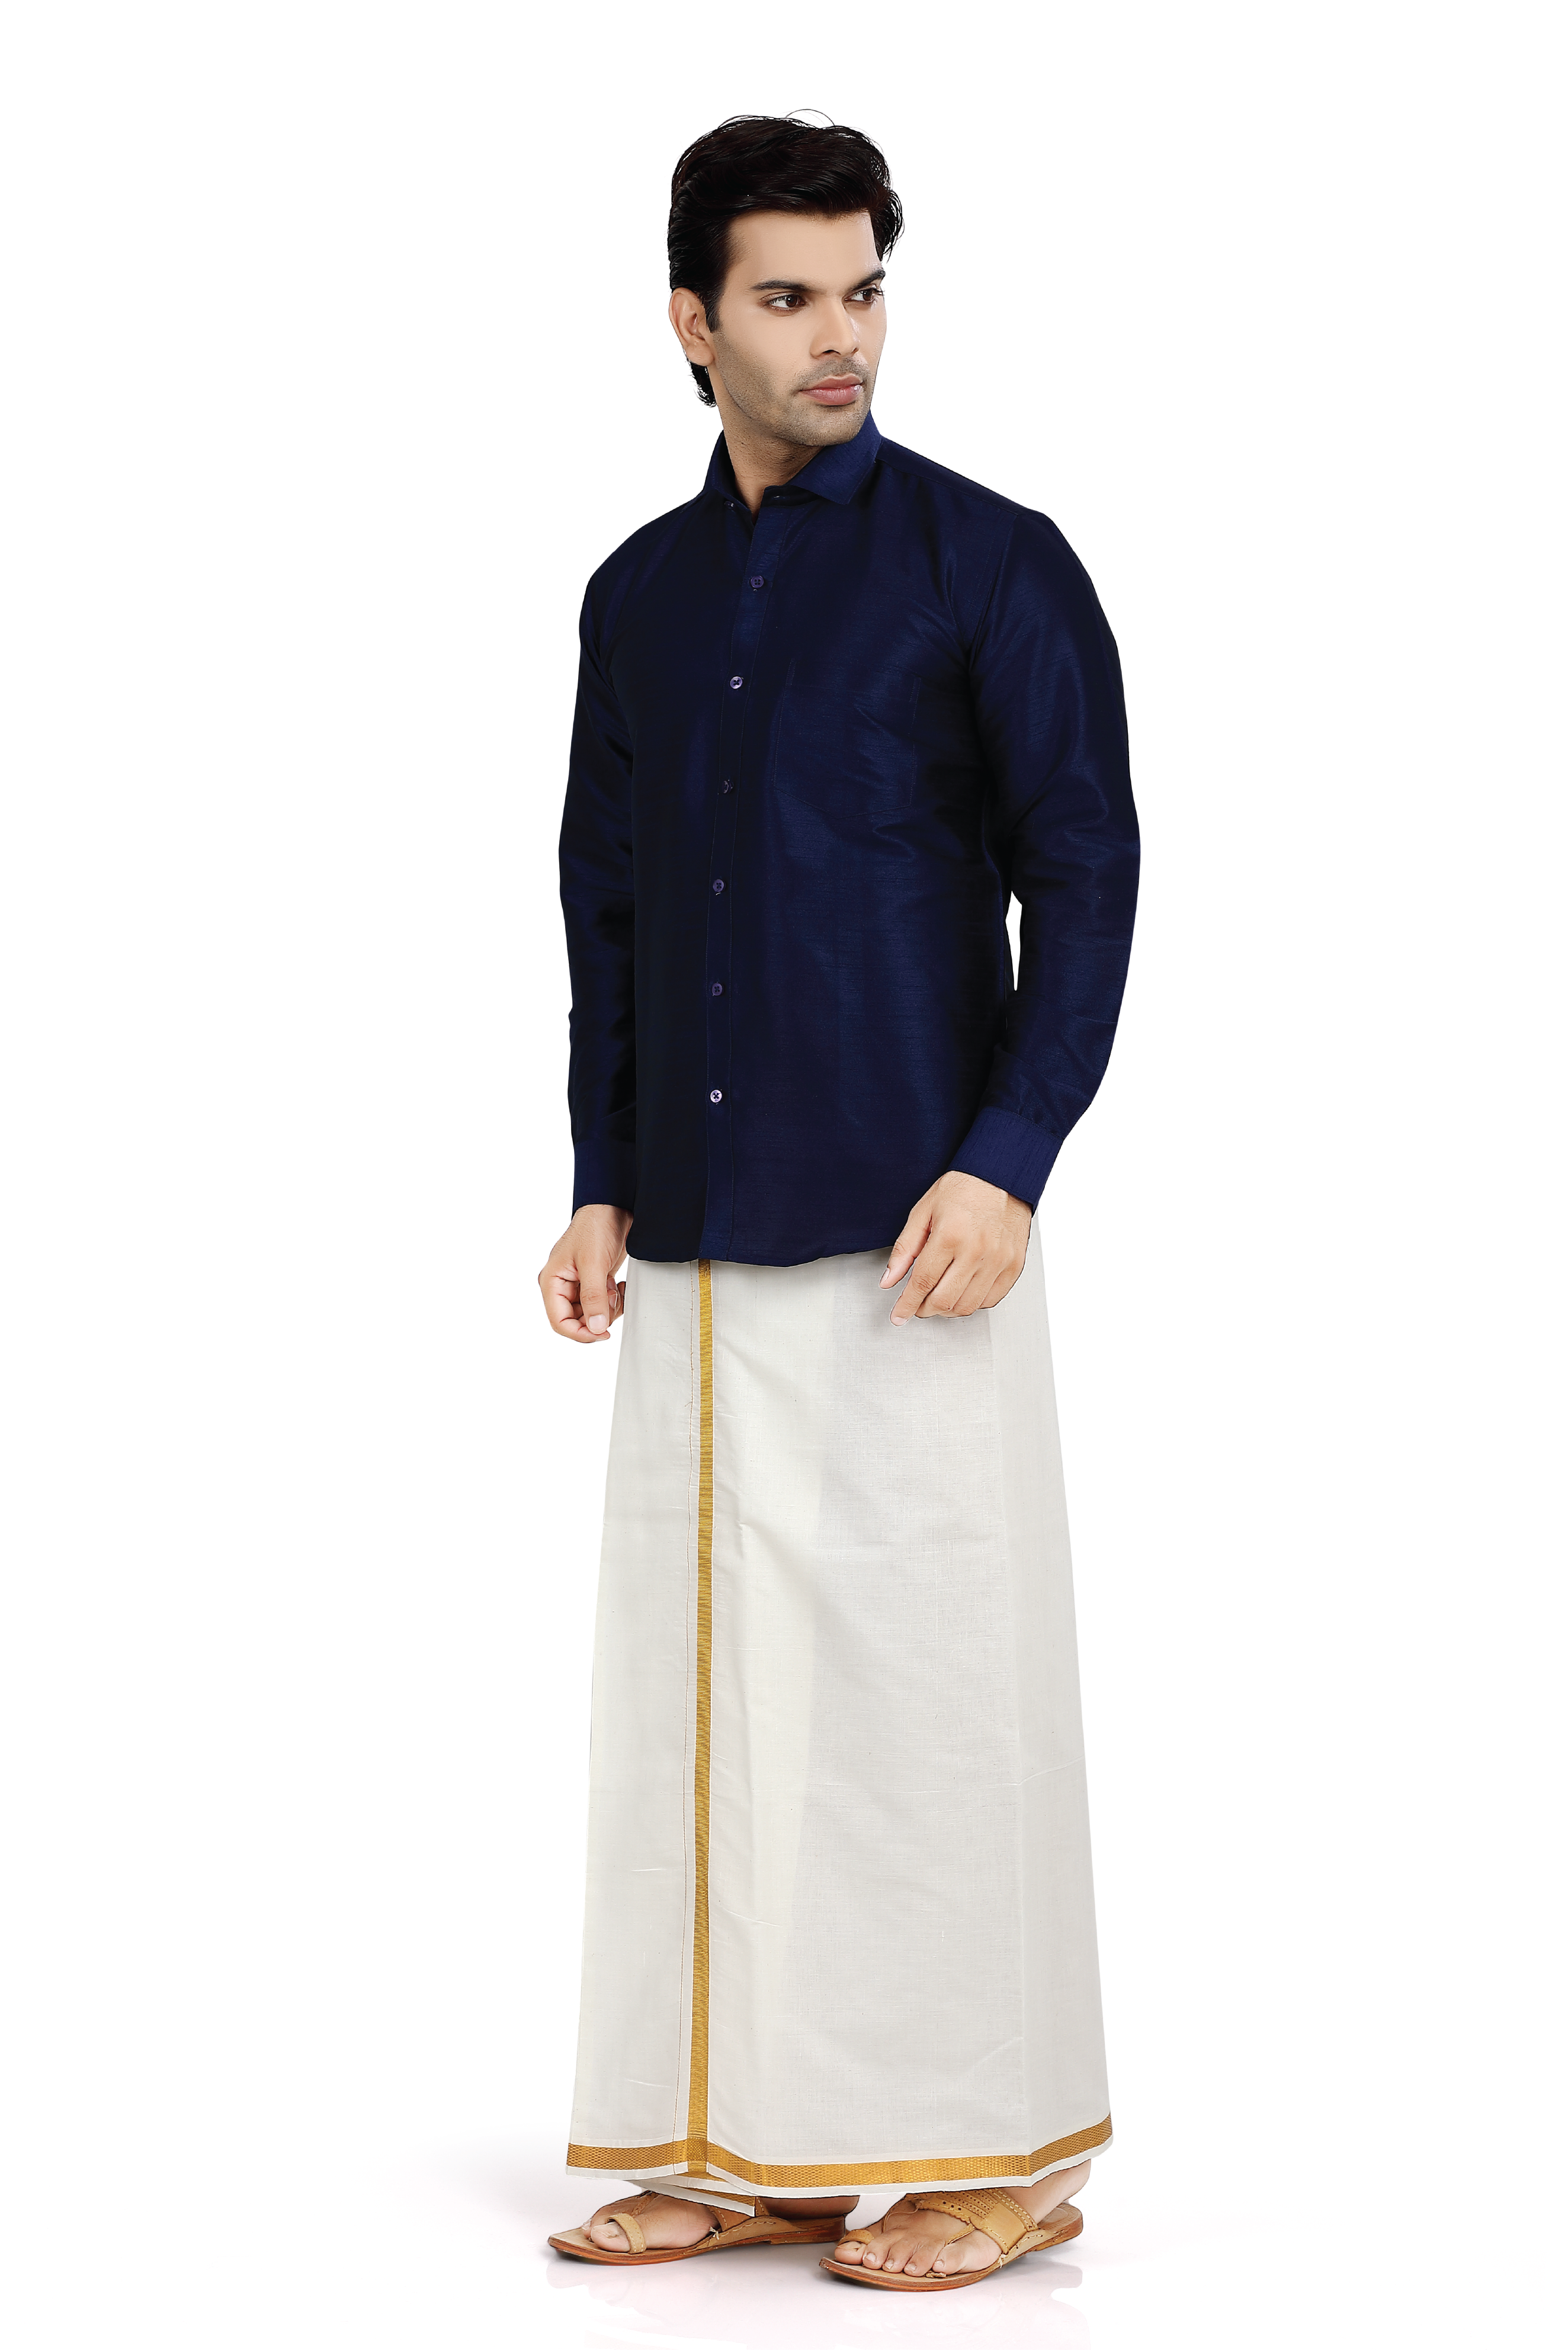 Dupion Silk Shirt in Navy Blue Full sleeves with Dhoti